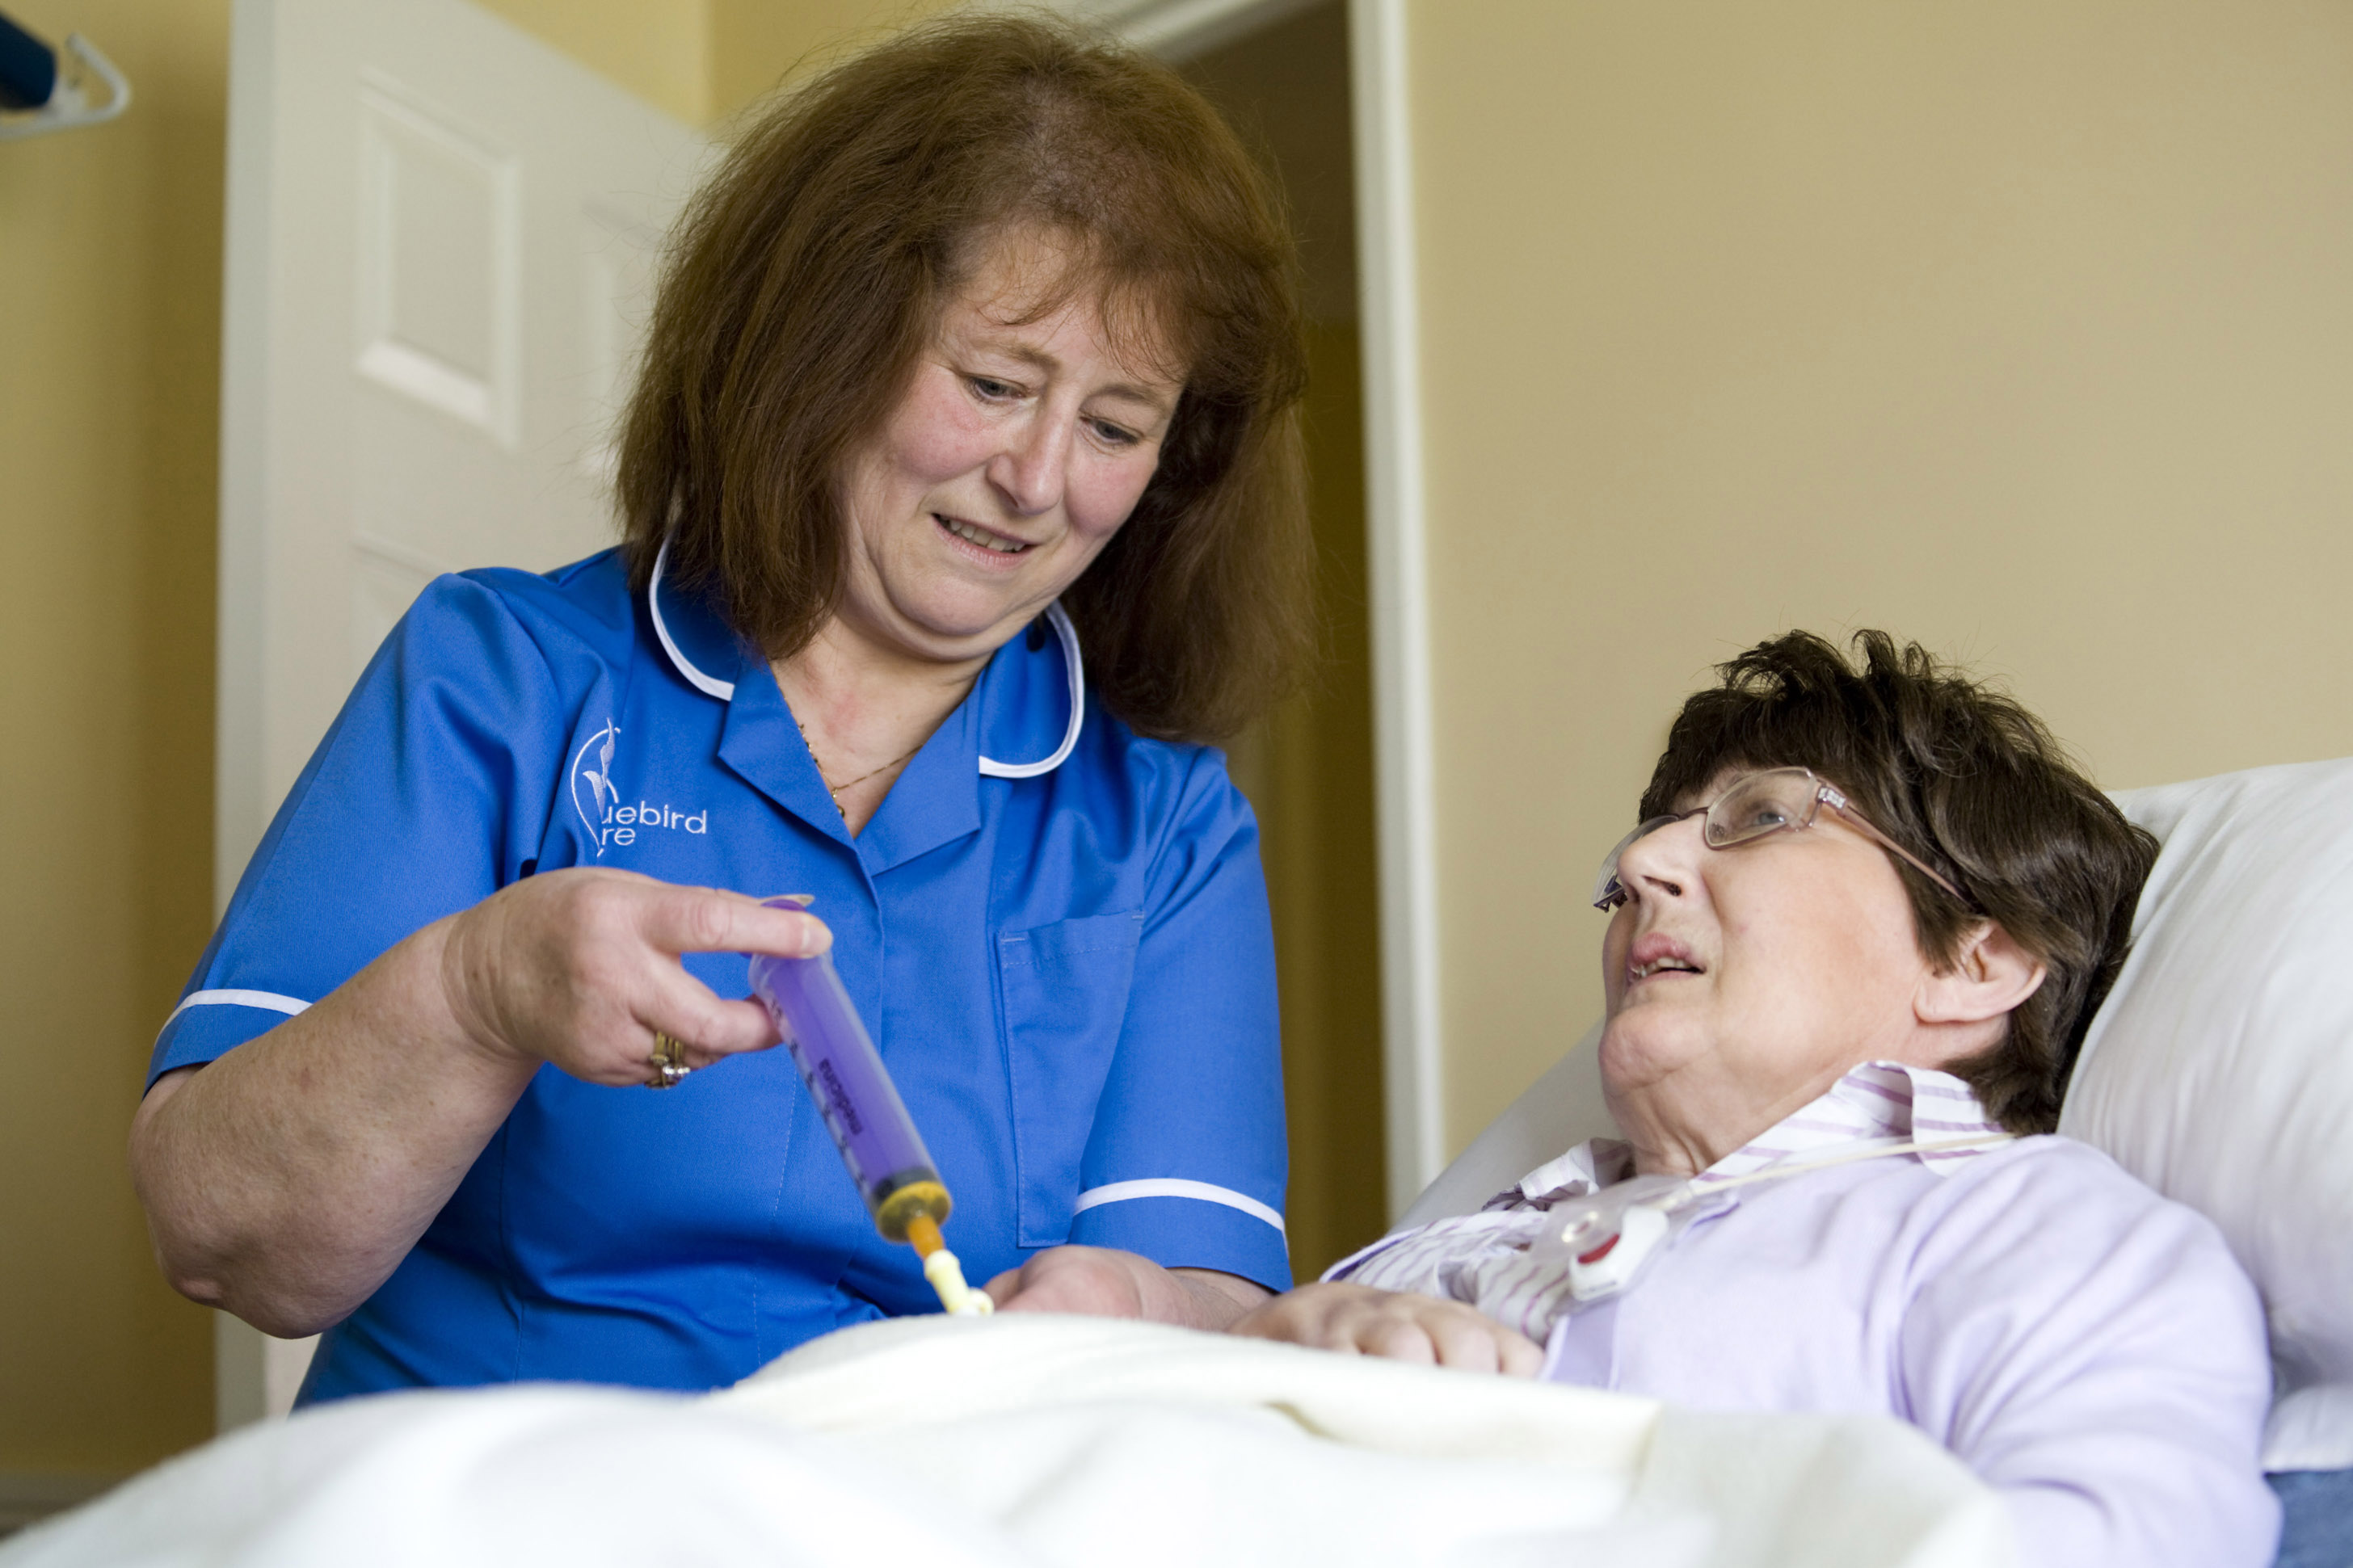 Home care in Darlington and Yarm, complex care in bed